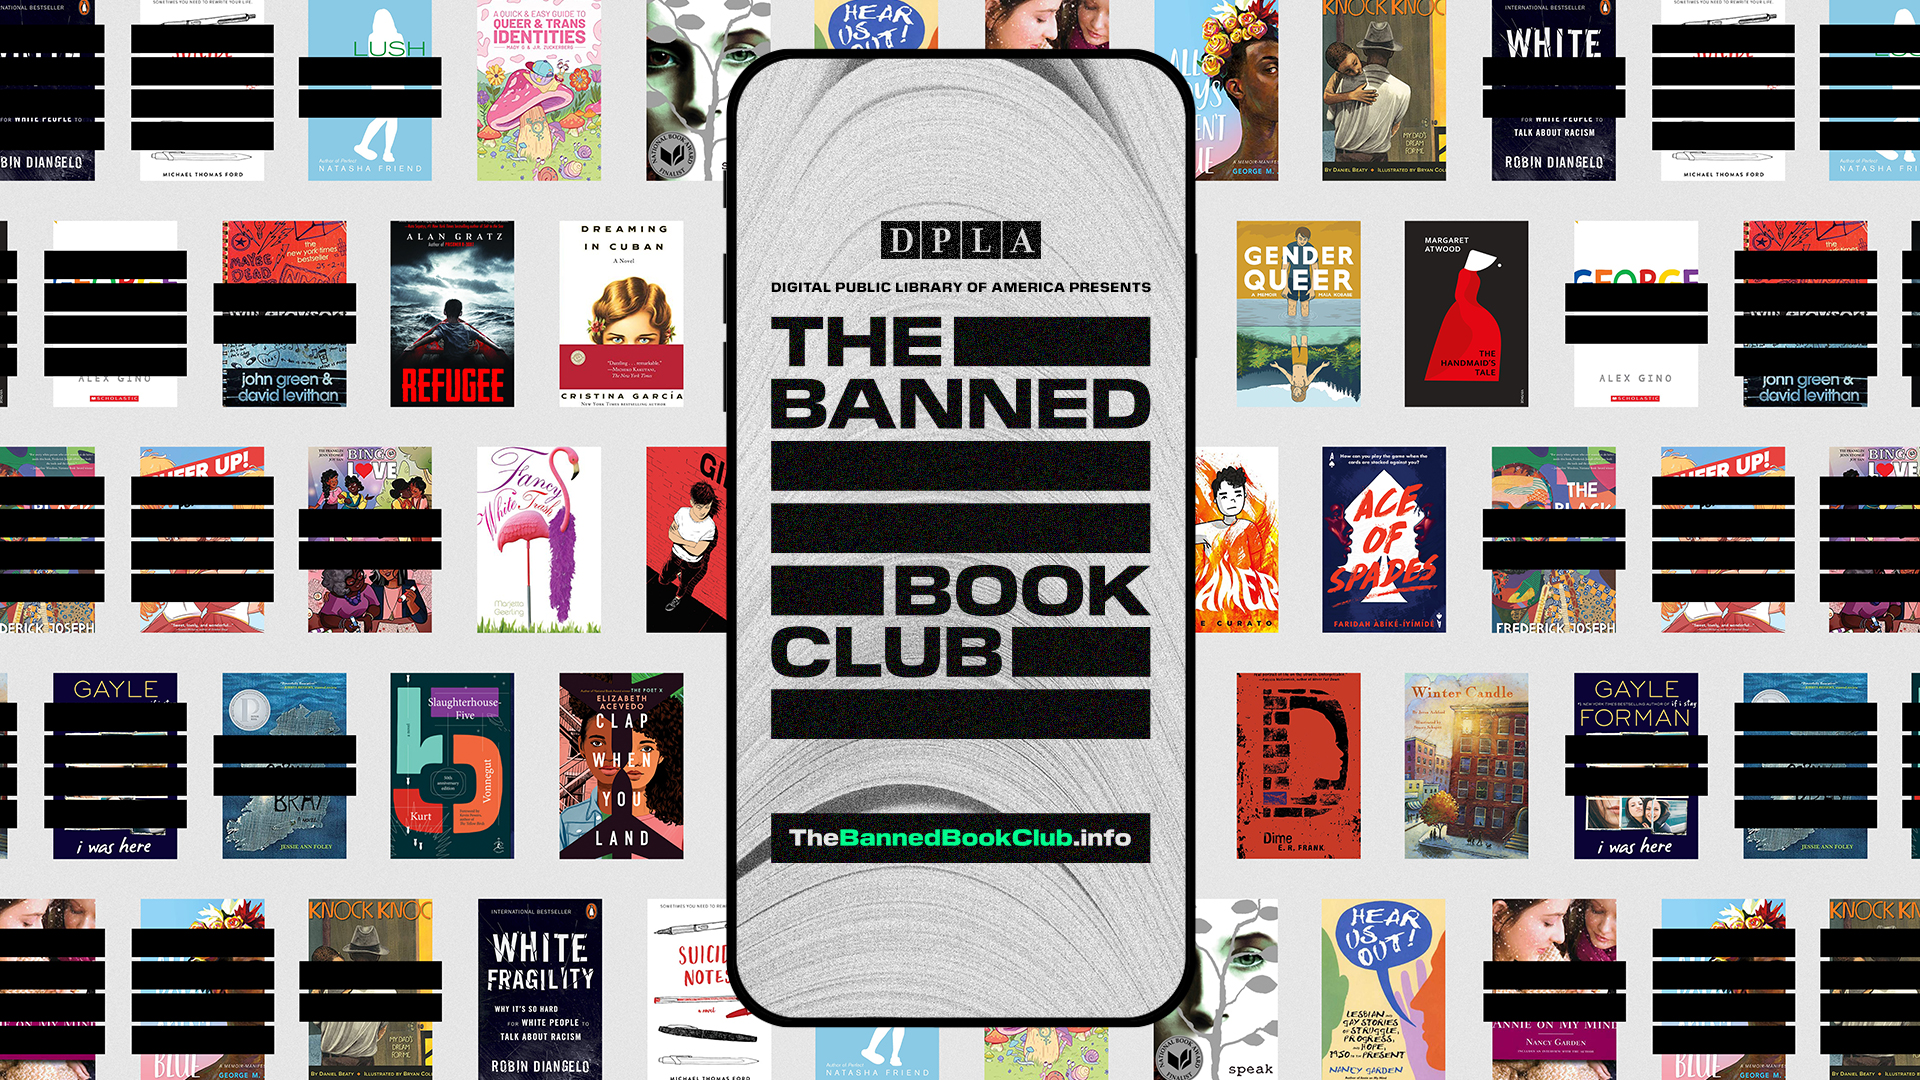 New Digital Resource Offers Free Access to Banned and Restricted Titles